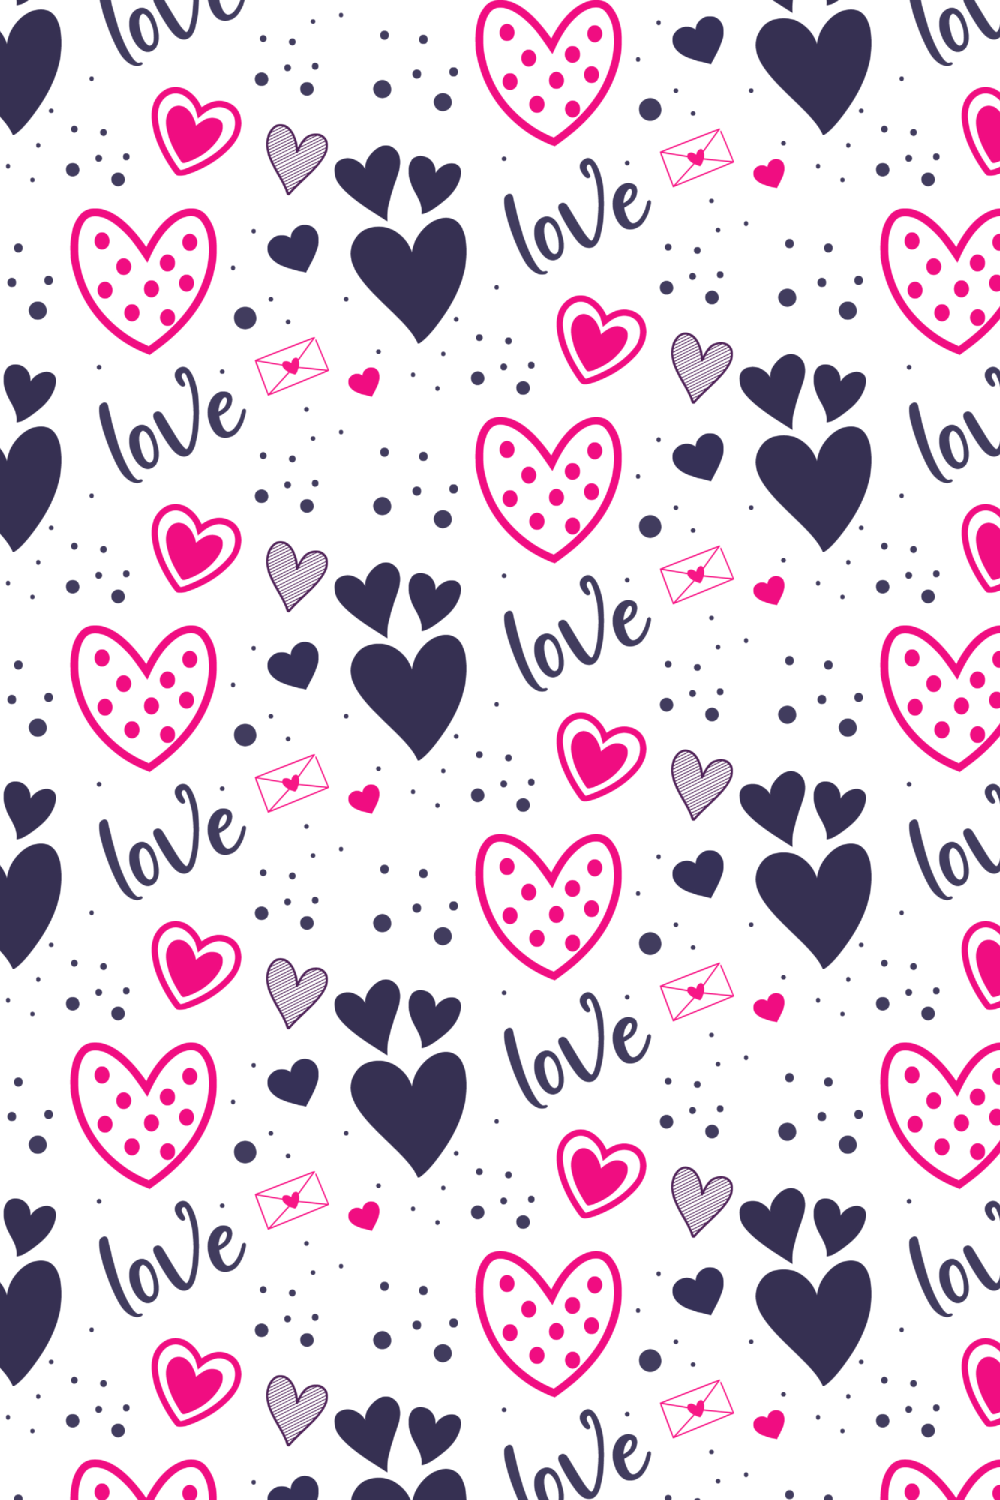 vector hand drawn valentines day pattern collection pinterest preview image.